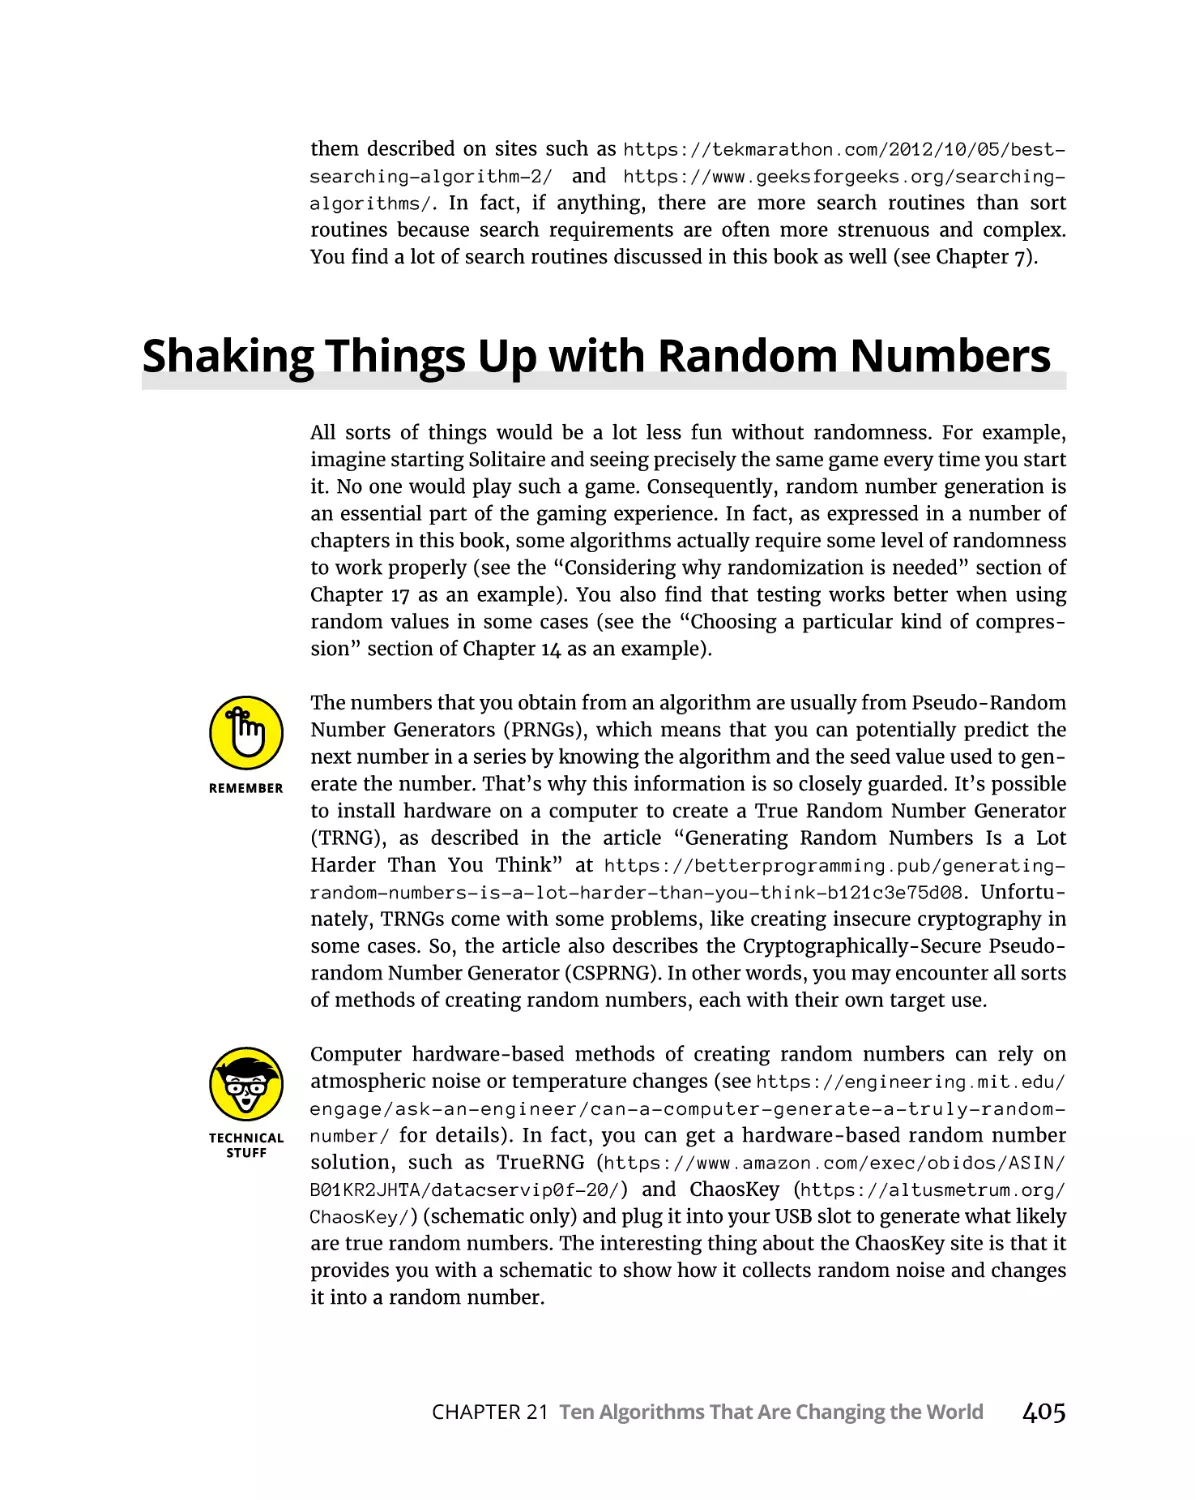 Shaking Things Up with Random Numbers